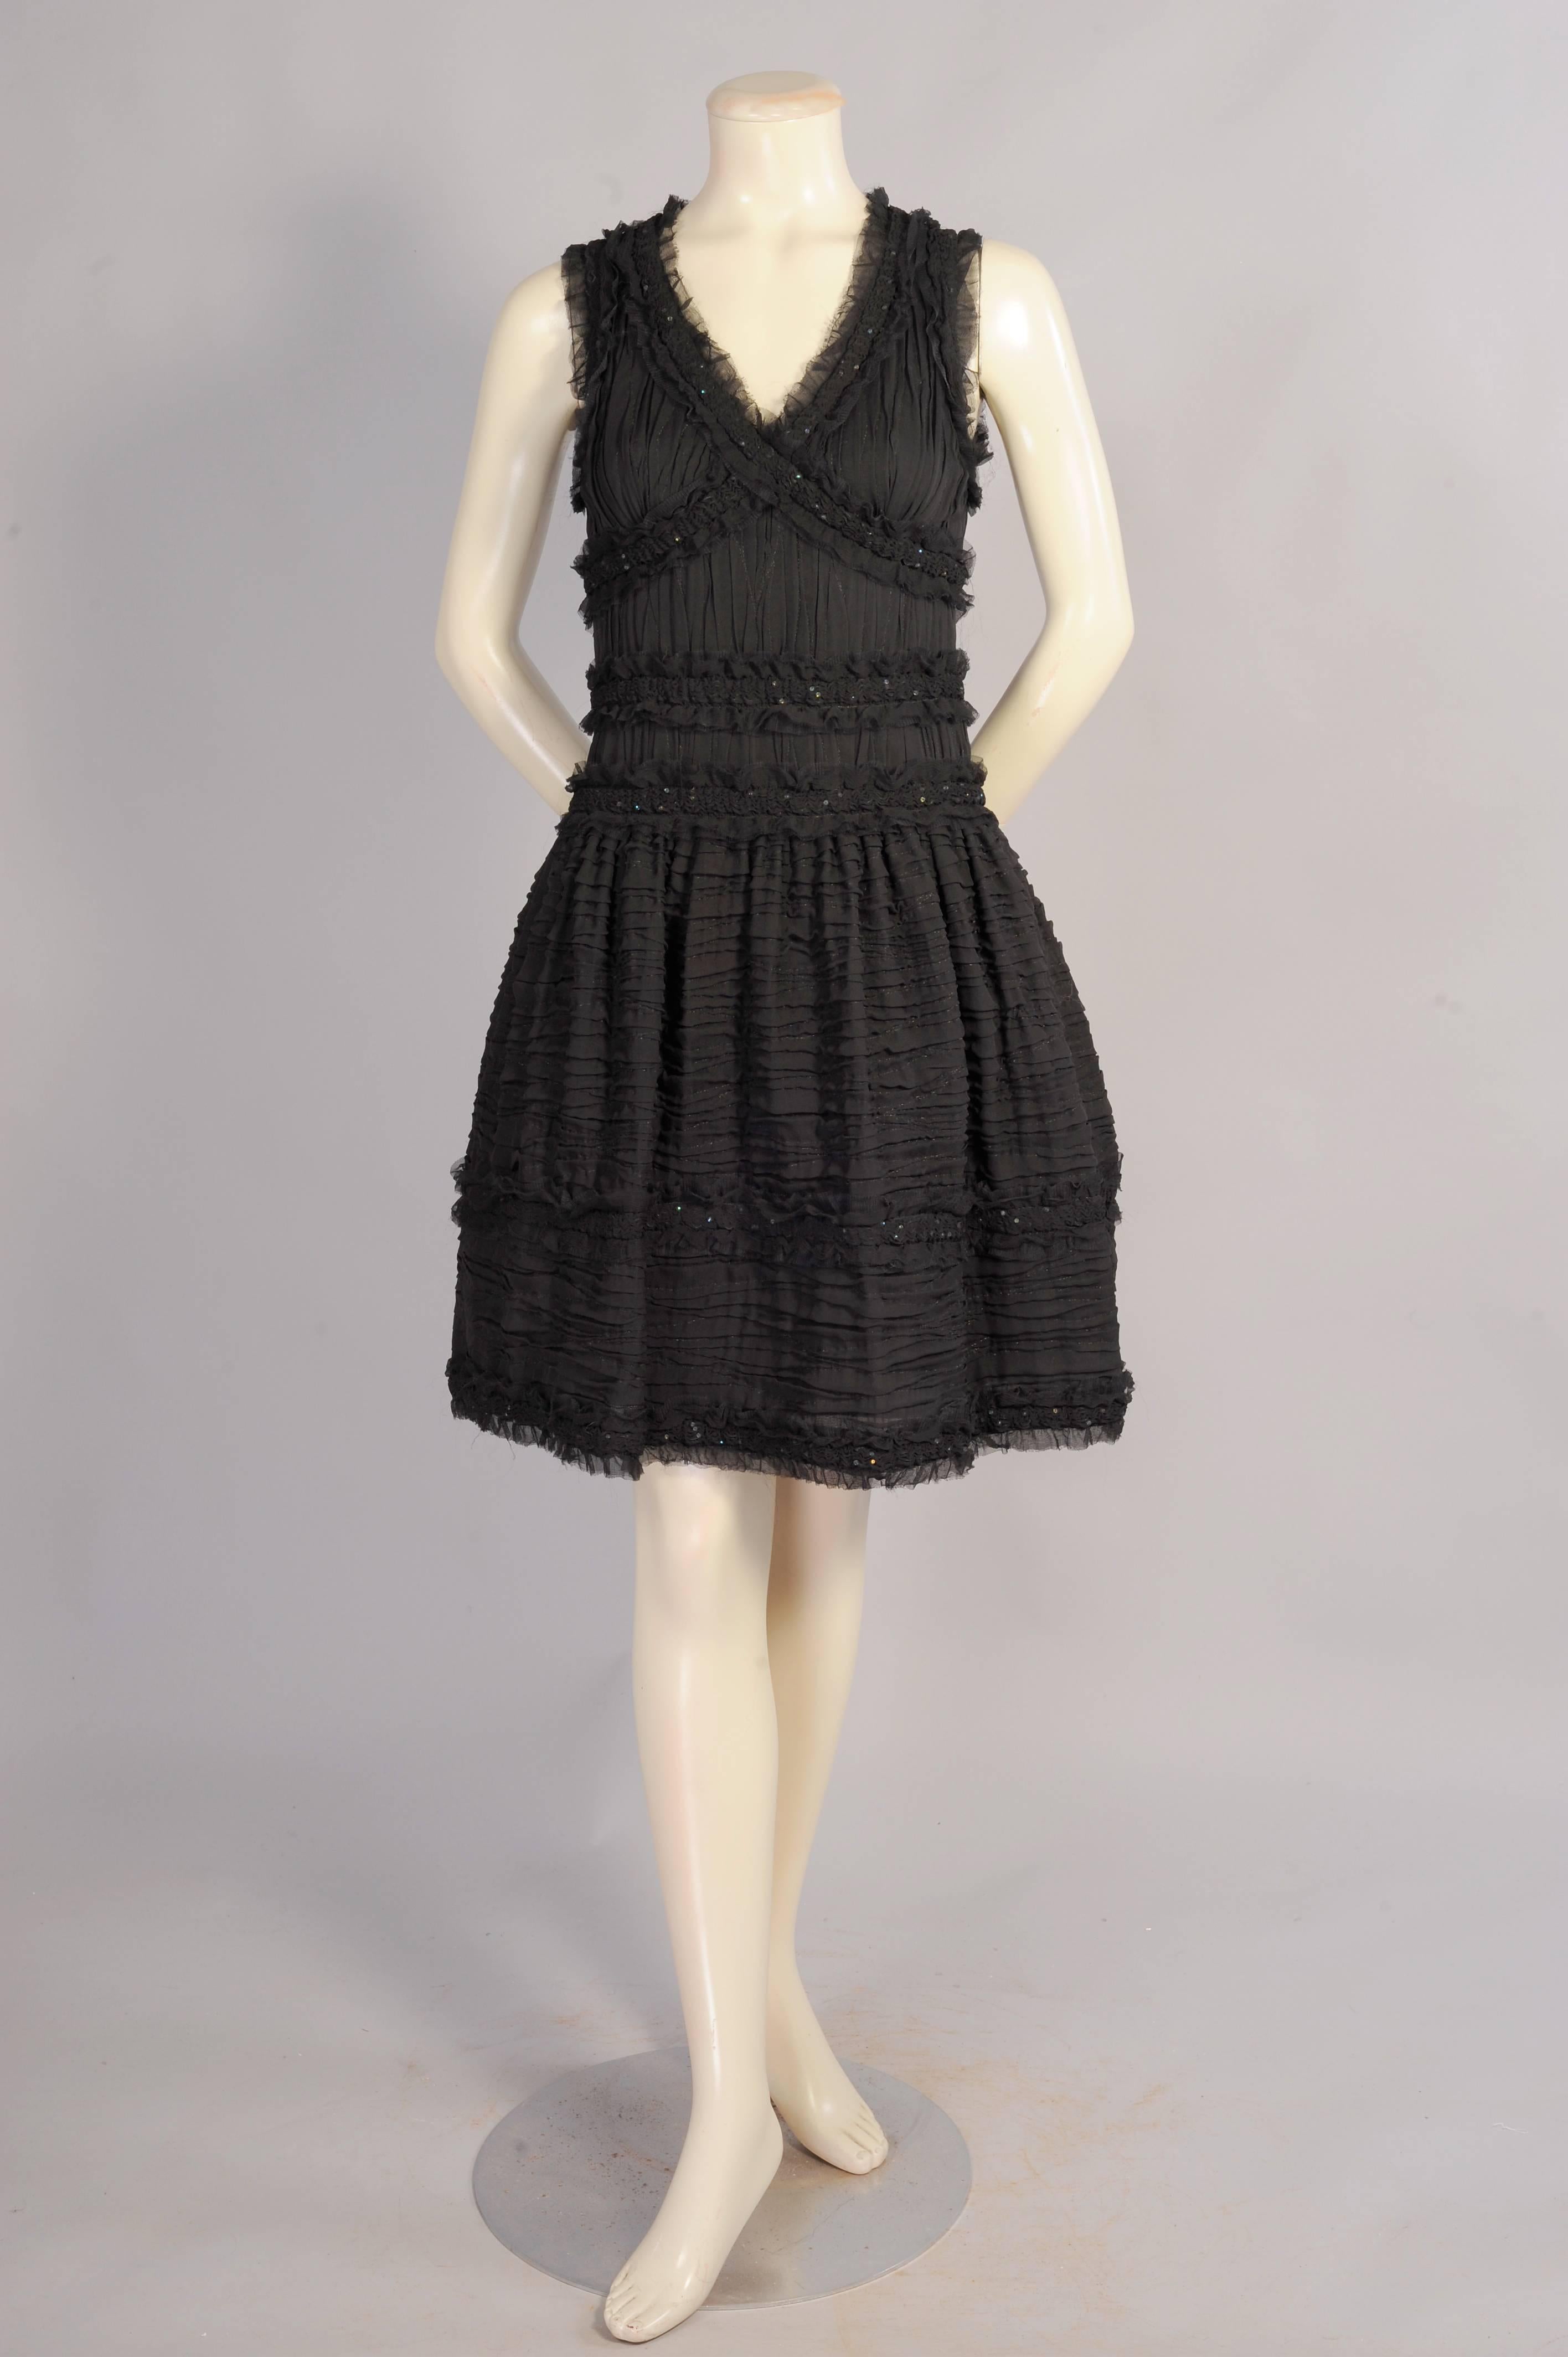 A fine black tulle is used to give this charming pleated silk and tulle dress a great shape. The sleeveless dress has bands of tulle and silk that criss cross the bodice, edge the neckline, armholes, waist and the bottom of the skirt. These bands